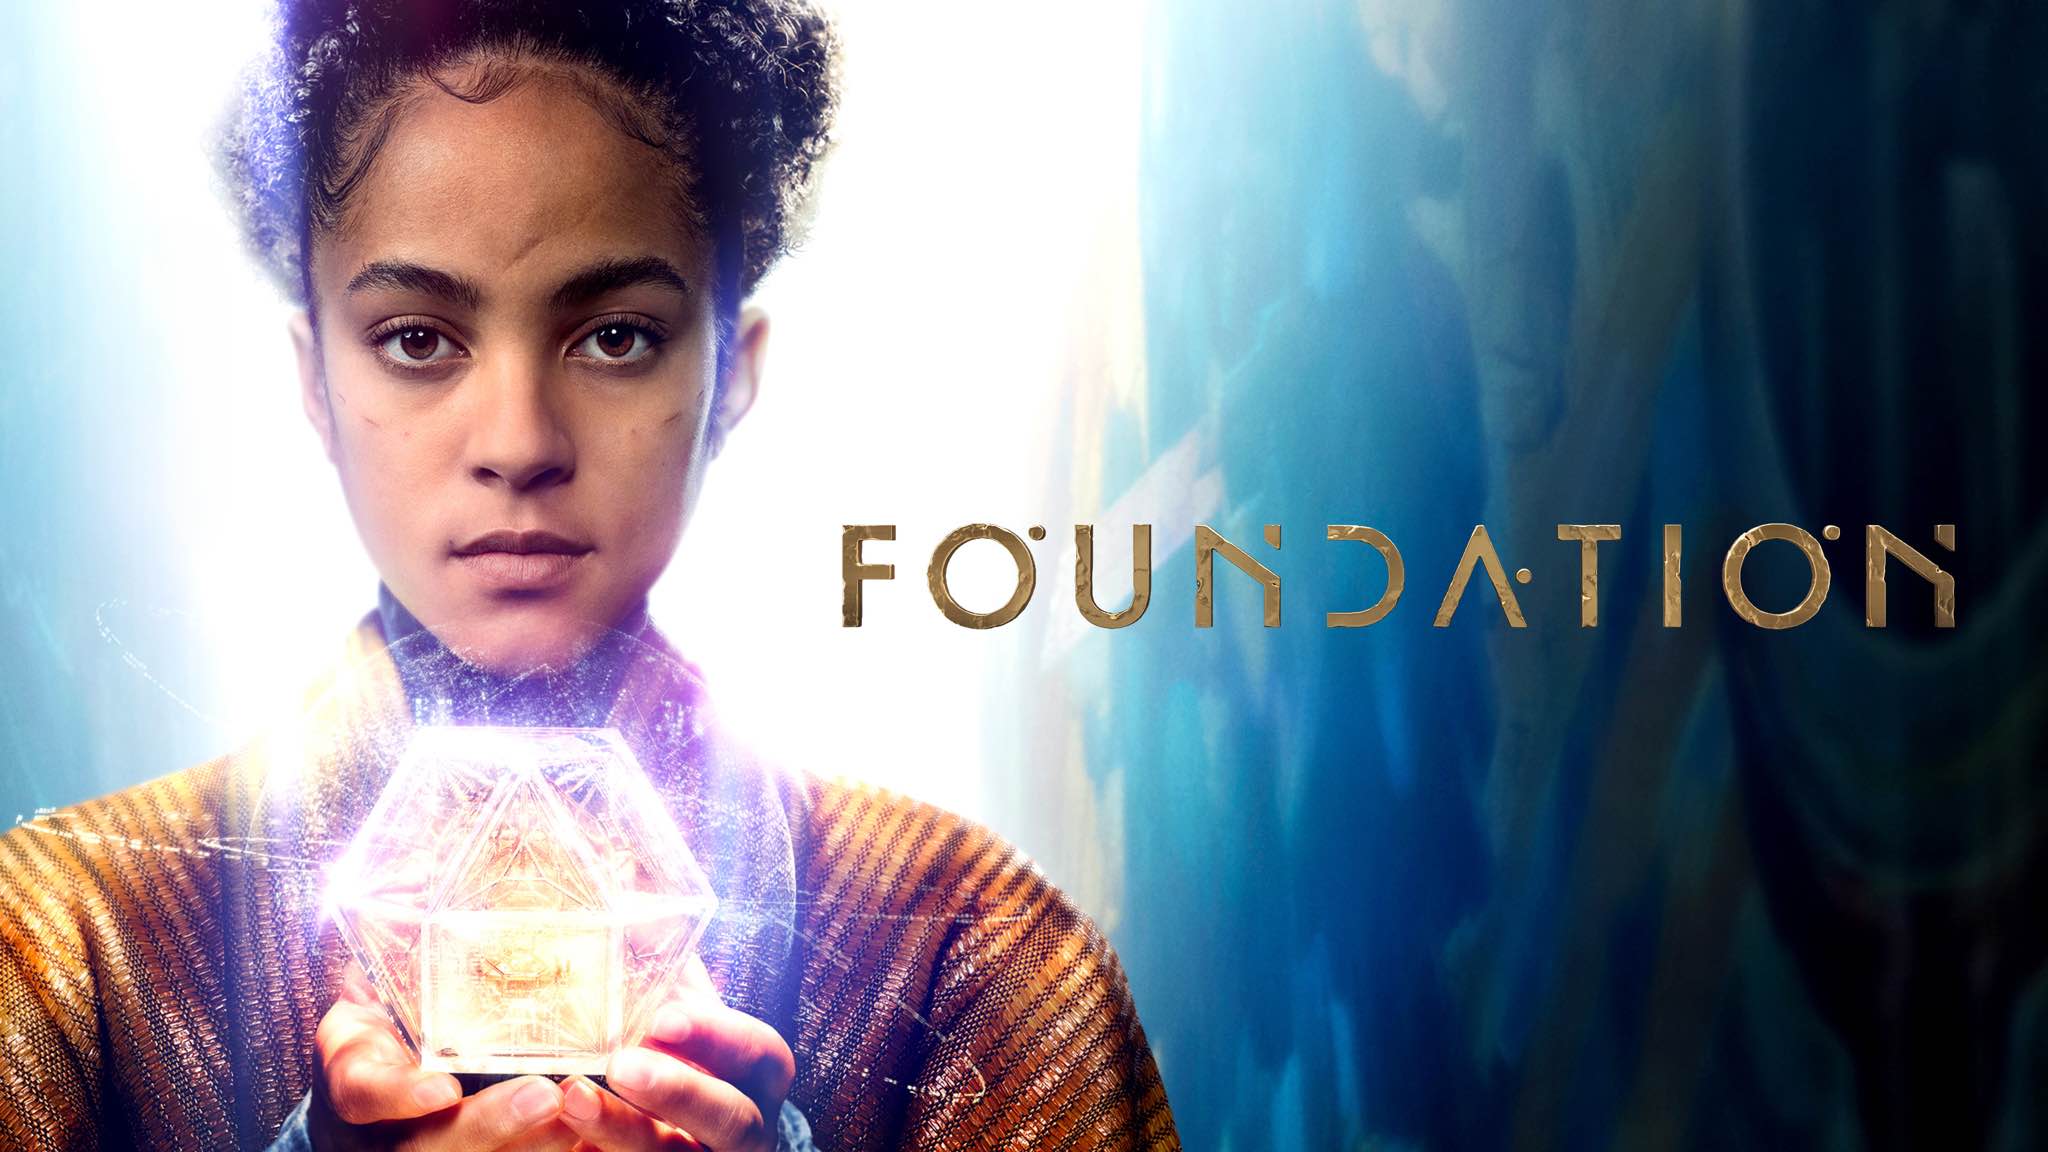 Promotional artwork for the Apple TV+ science/fiction show "Foundation" based on stories by Isaac Asimov